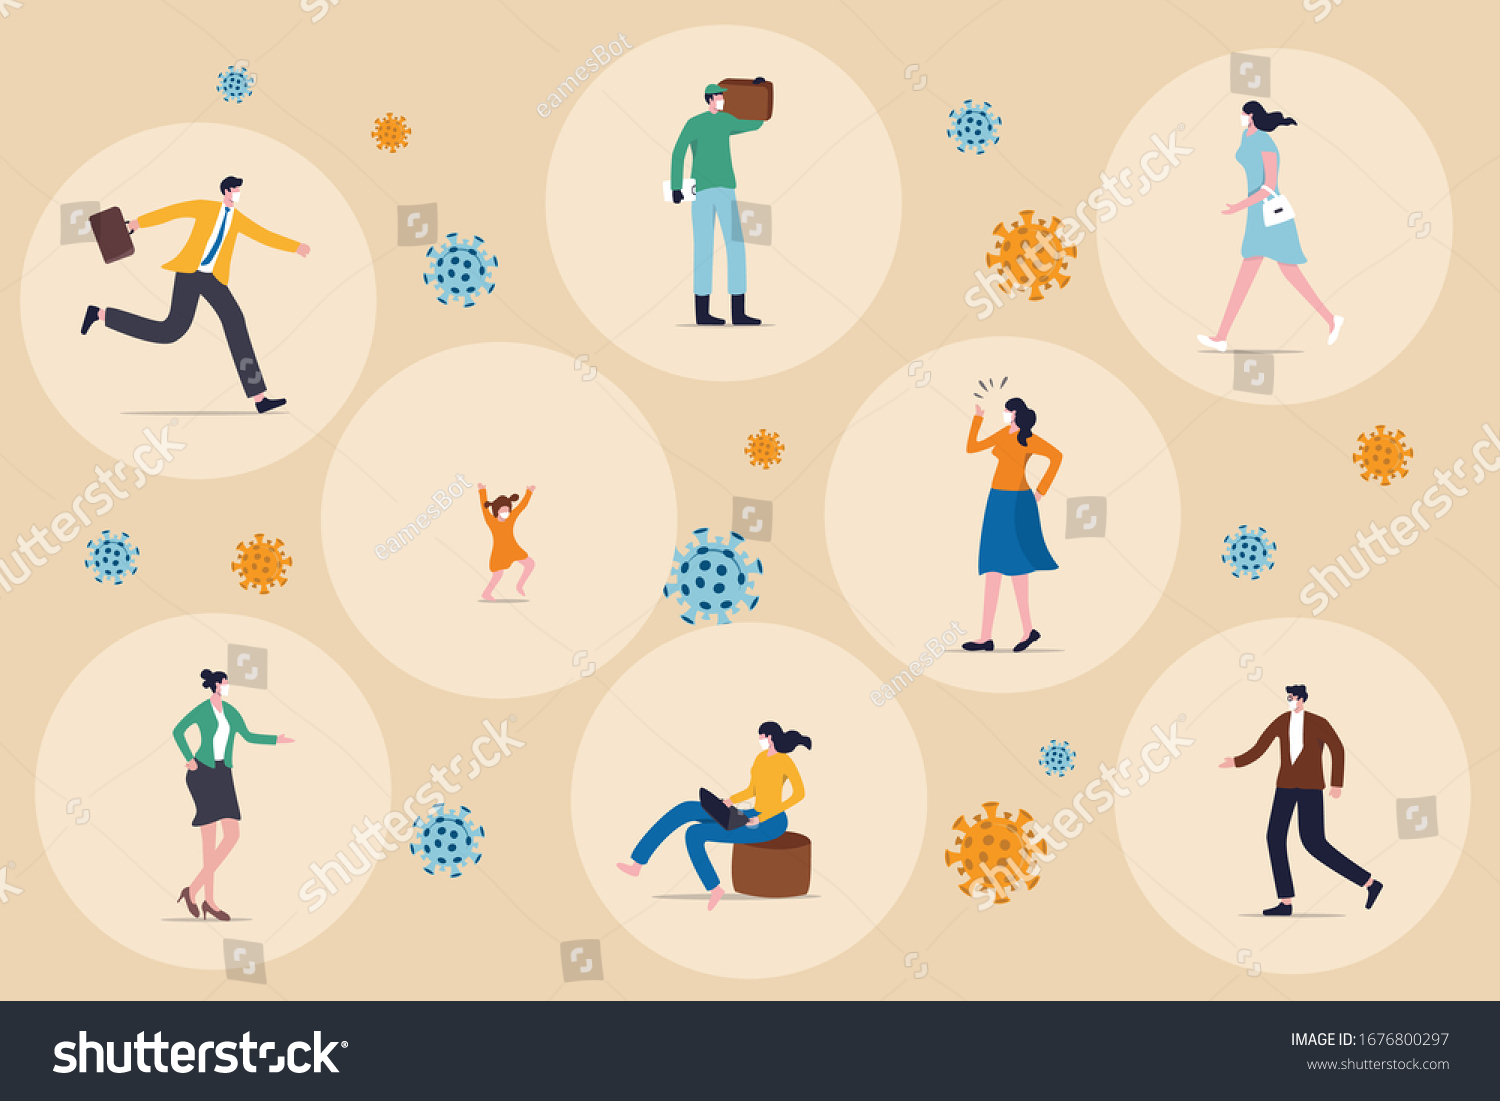 Social distancing concept, people keep distance in public society to protect from COVID-19 coronavirus outbreak spreading concept, people wearing mask keep distance away in circle with virus pathogens #1676800297